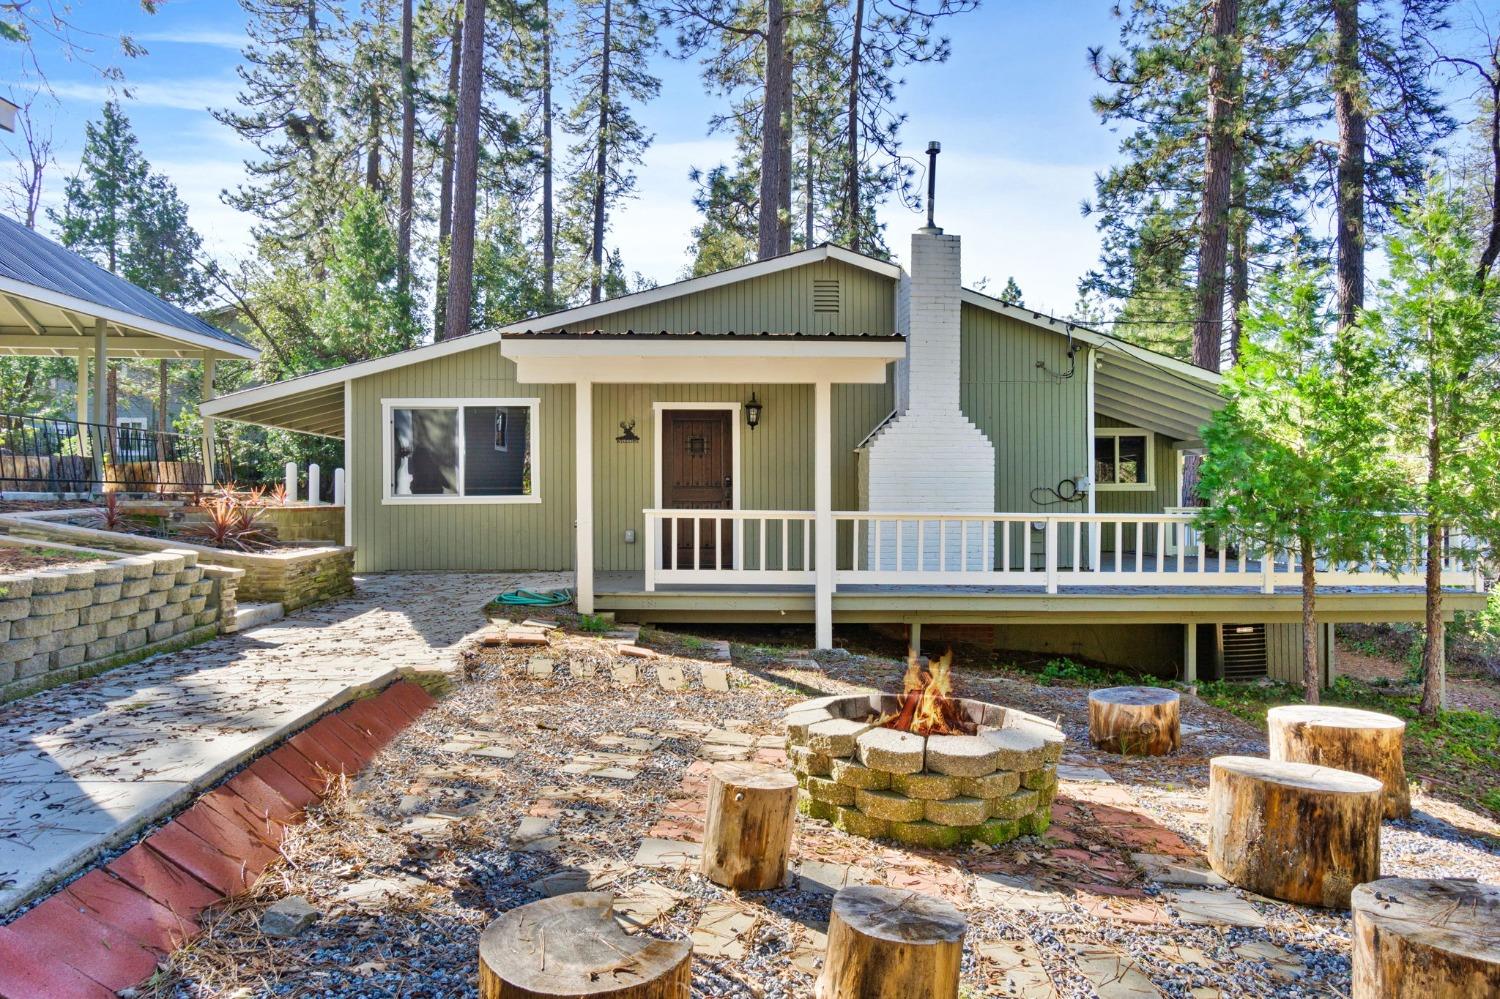 Photo of 40476 Rd 274 in Bass Lake, CA